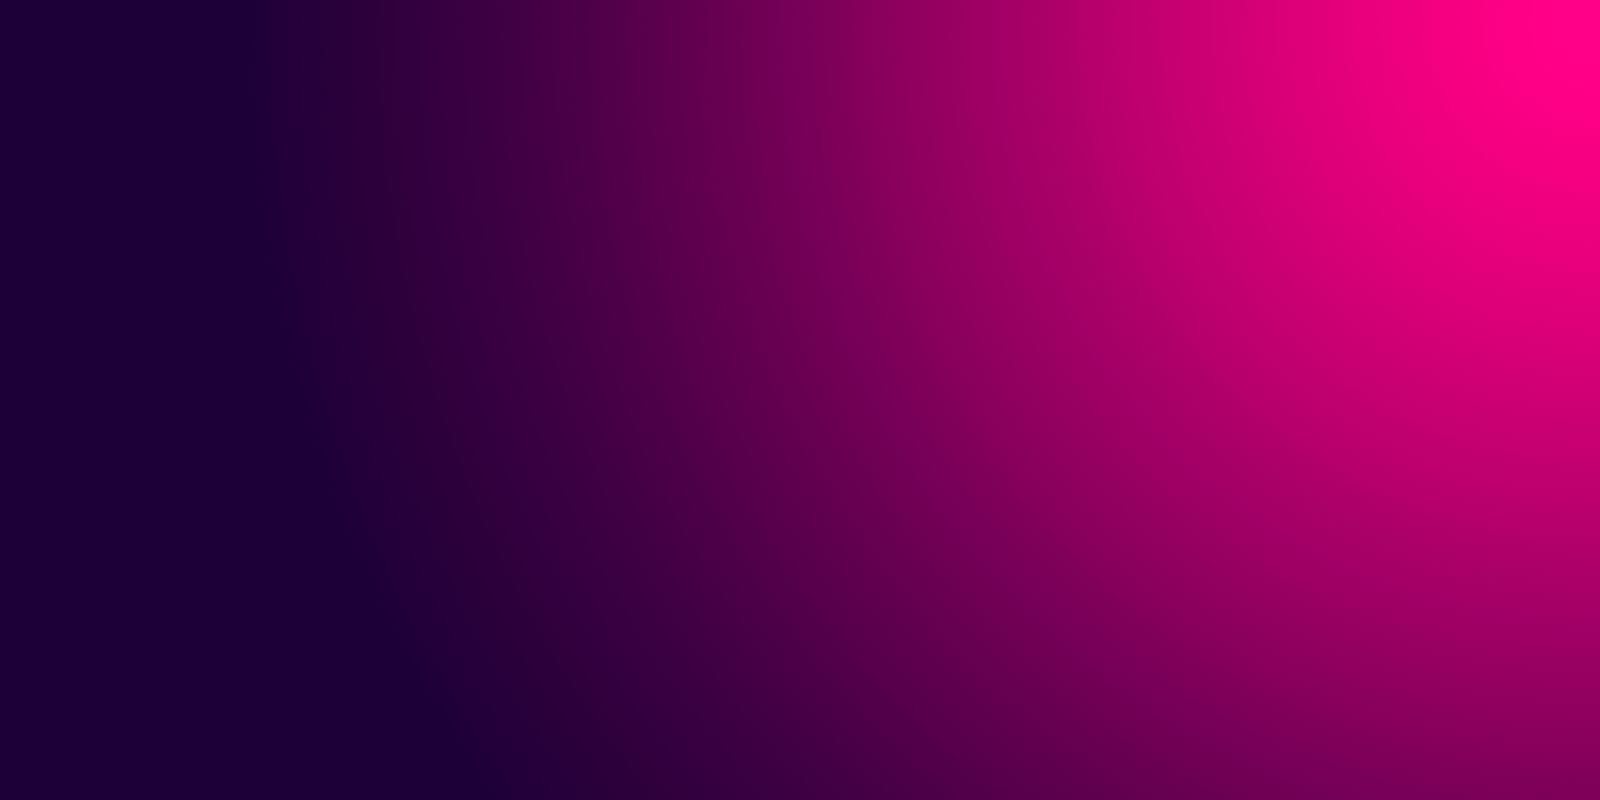 Background gradient from purple (left) to Pink (right)